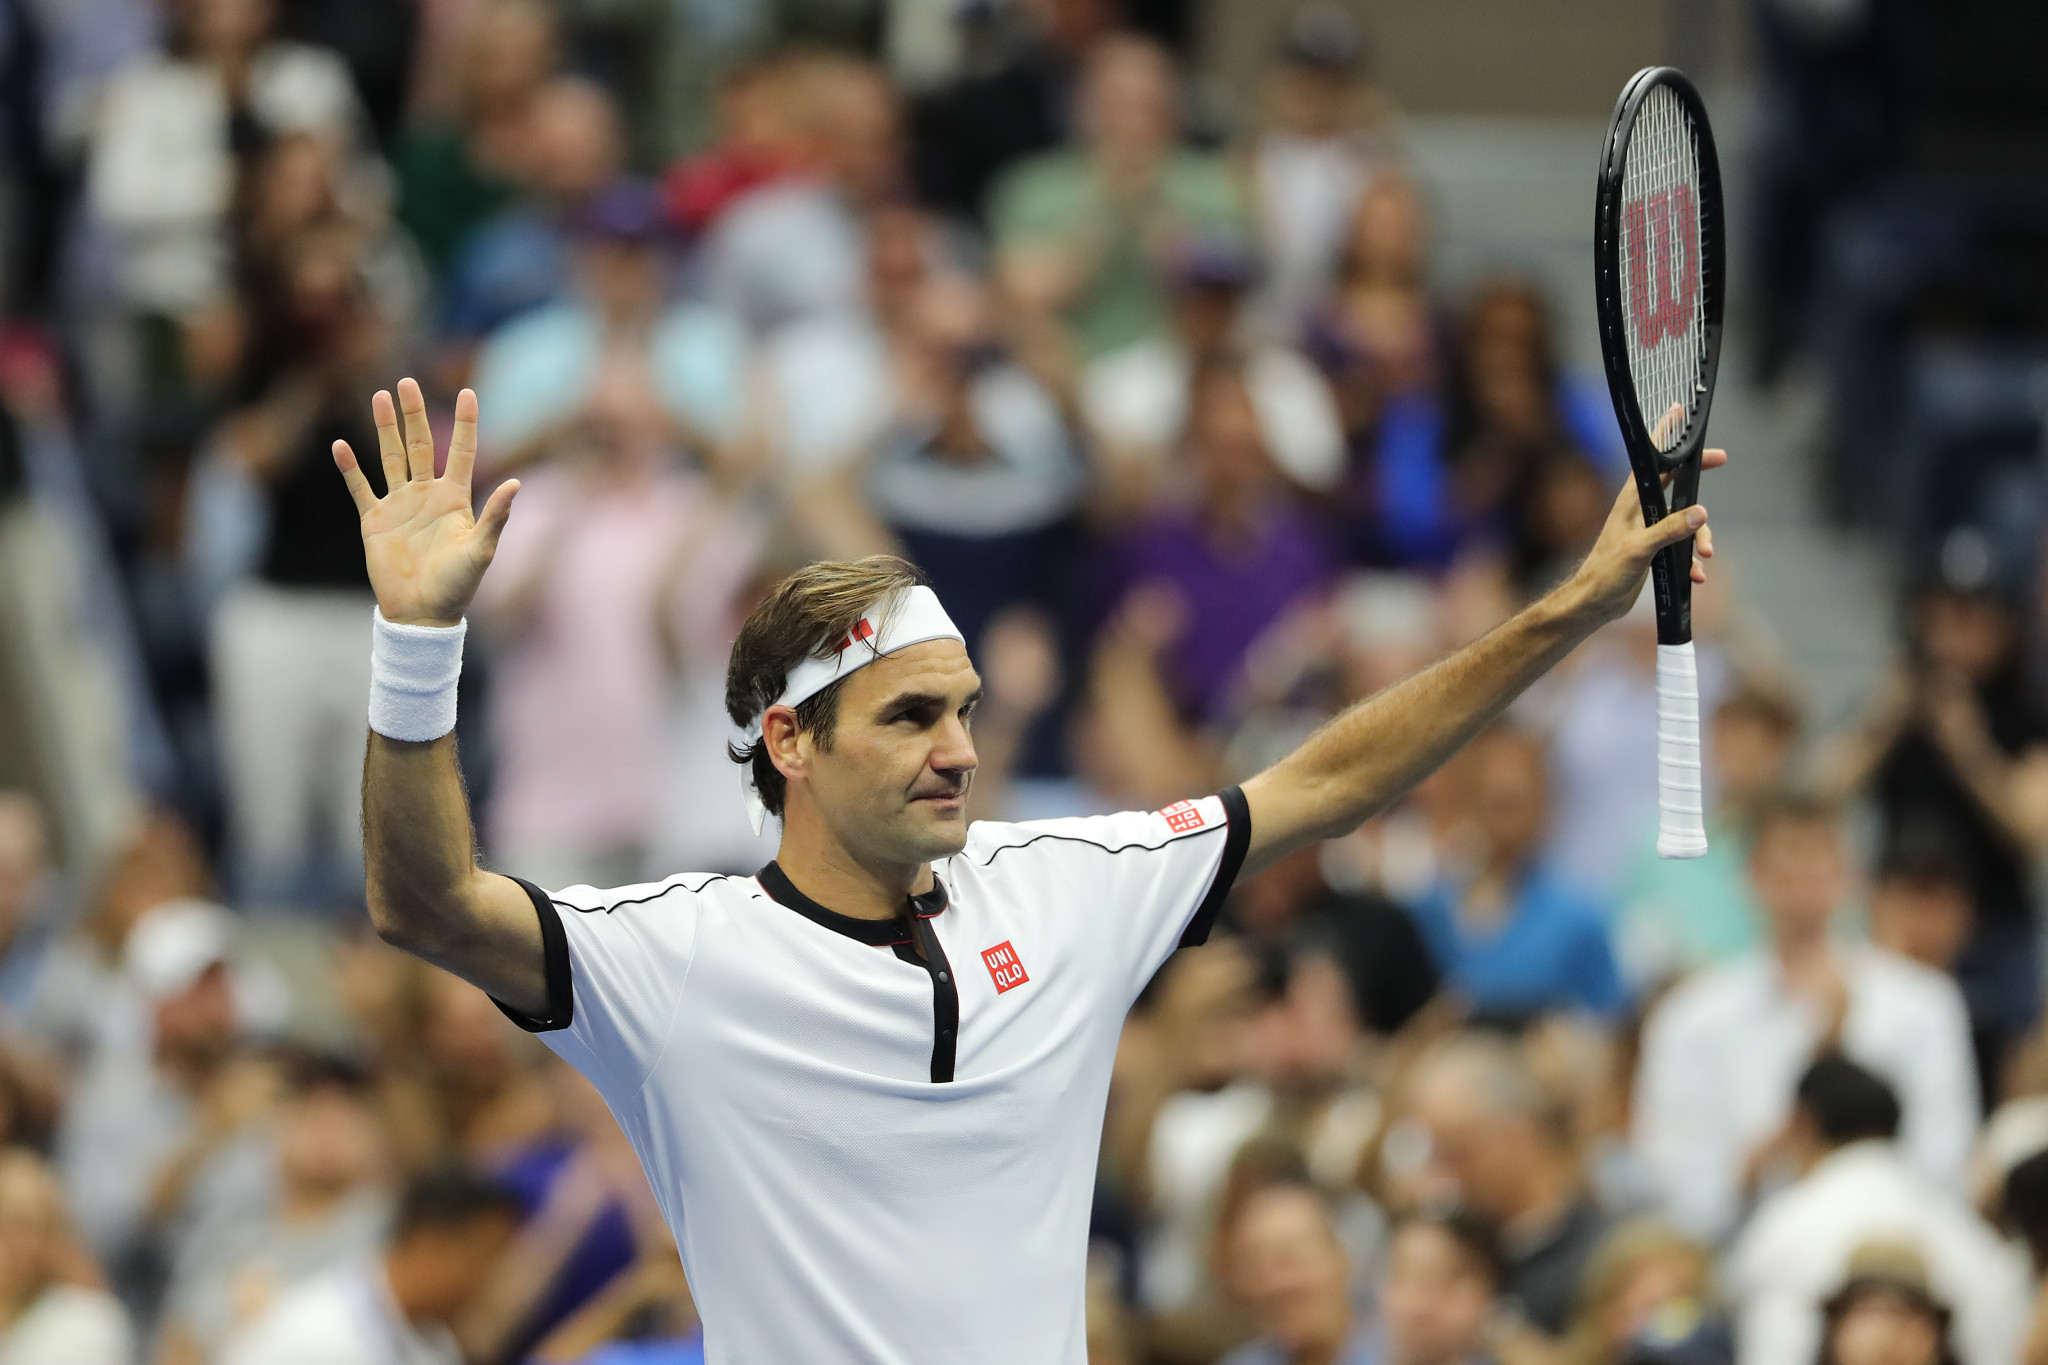 Roger Federer came from behind again to reach round three ©Getty Images